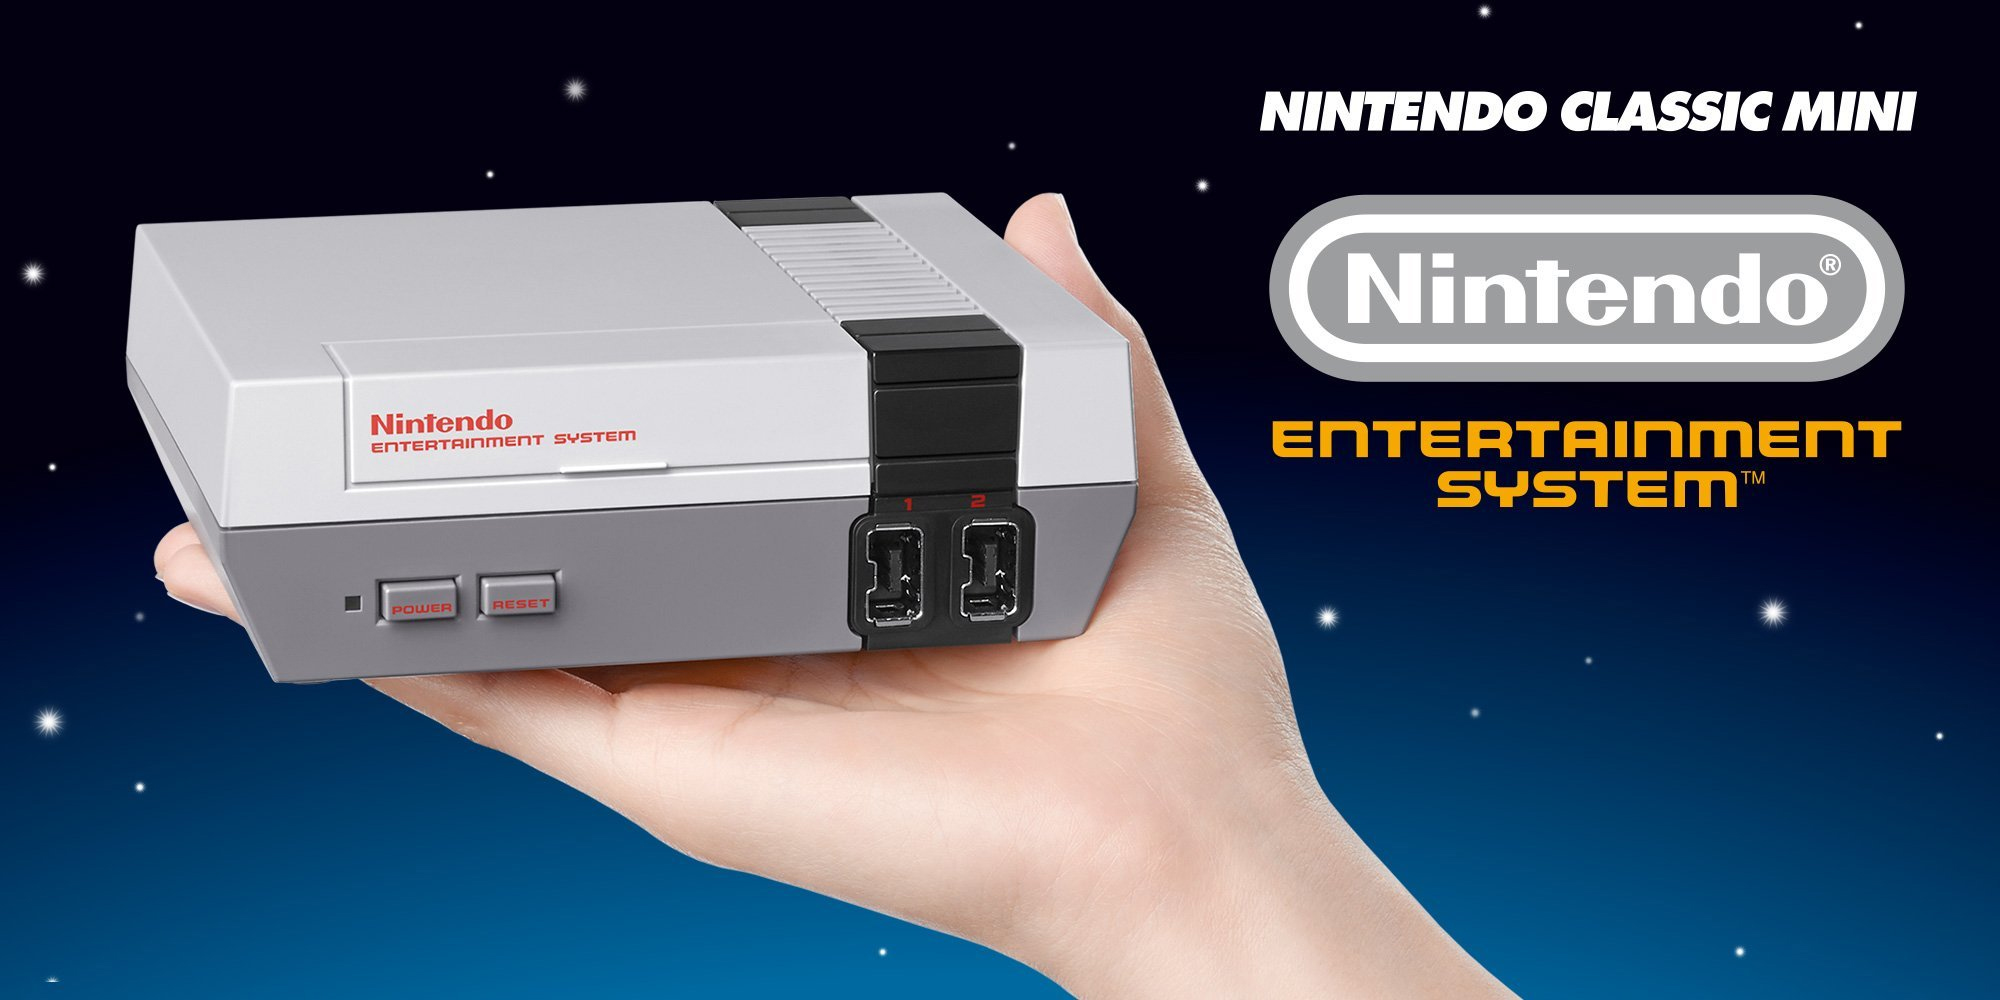 NES Mini is coming back in 2018